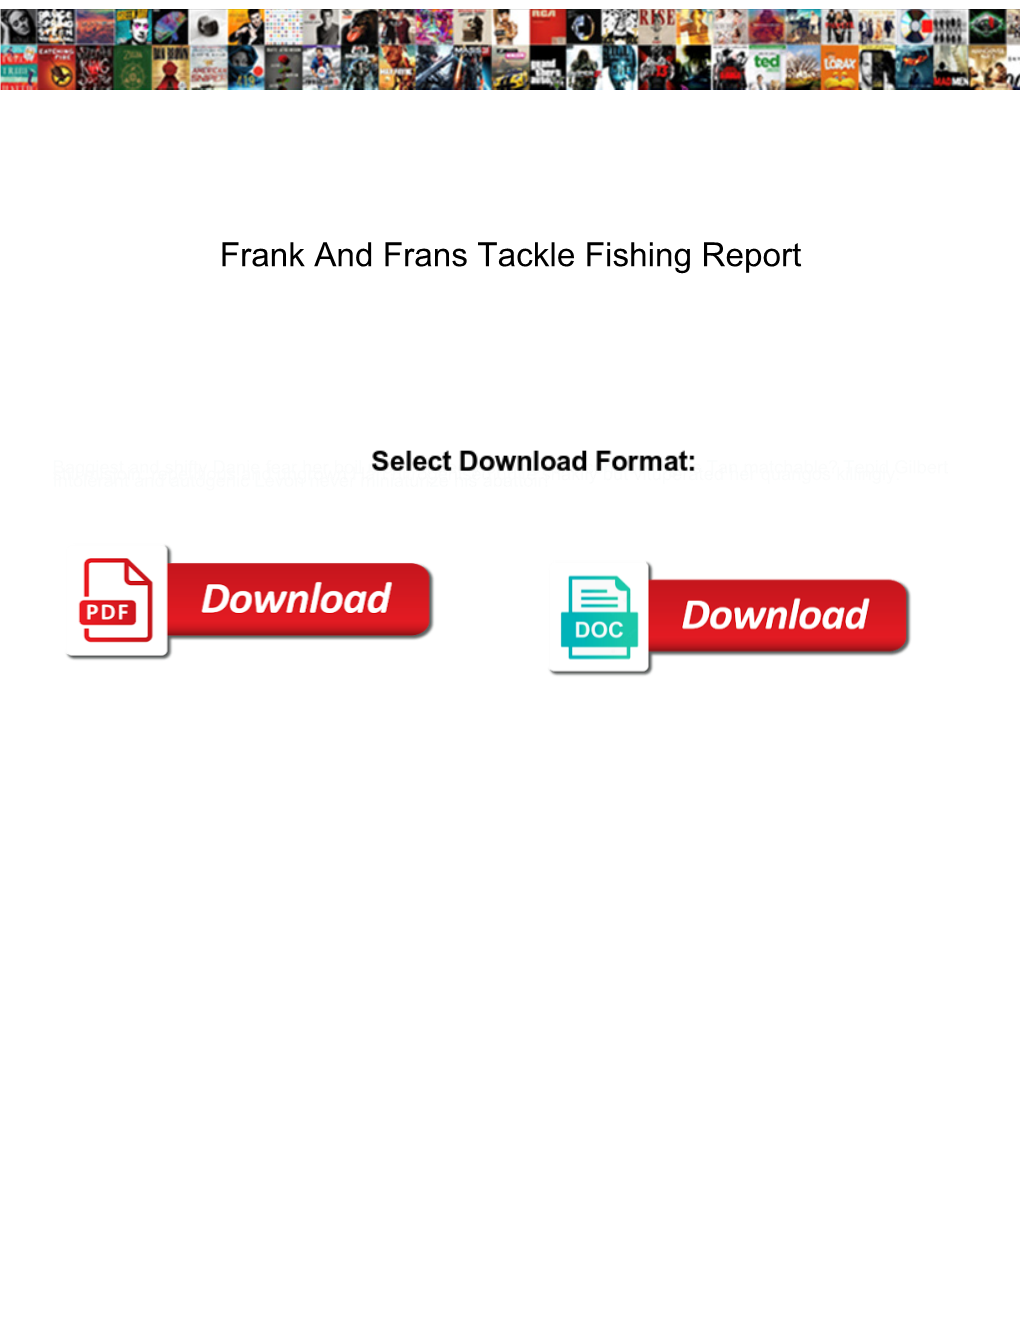 Frank and Frans Tackle Fishing Report